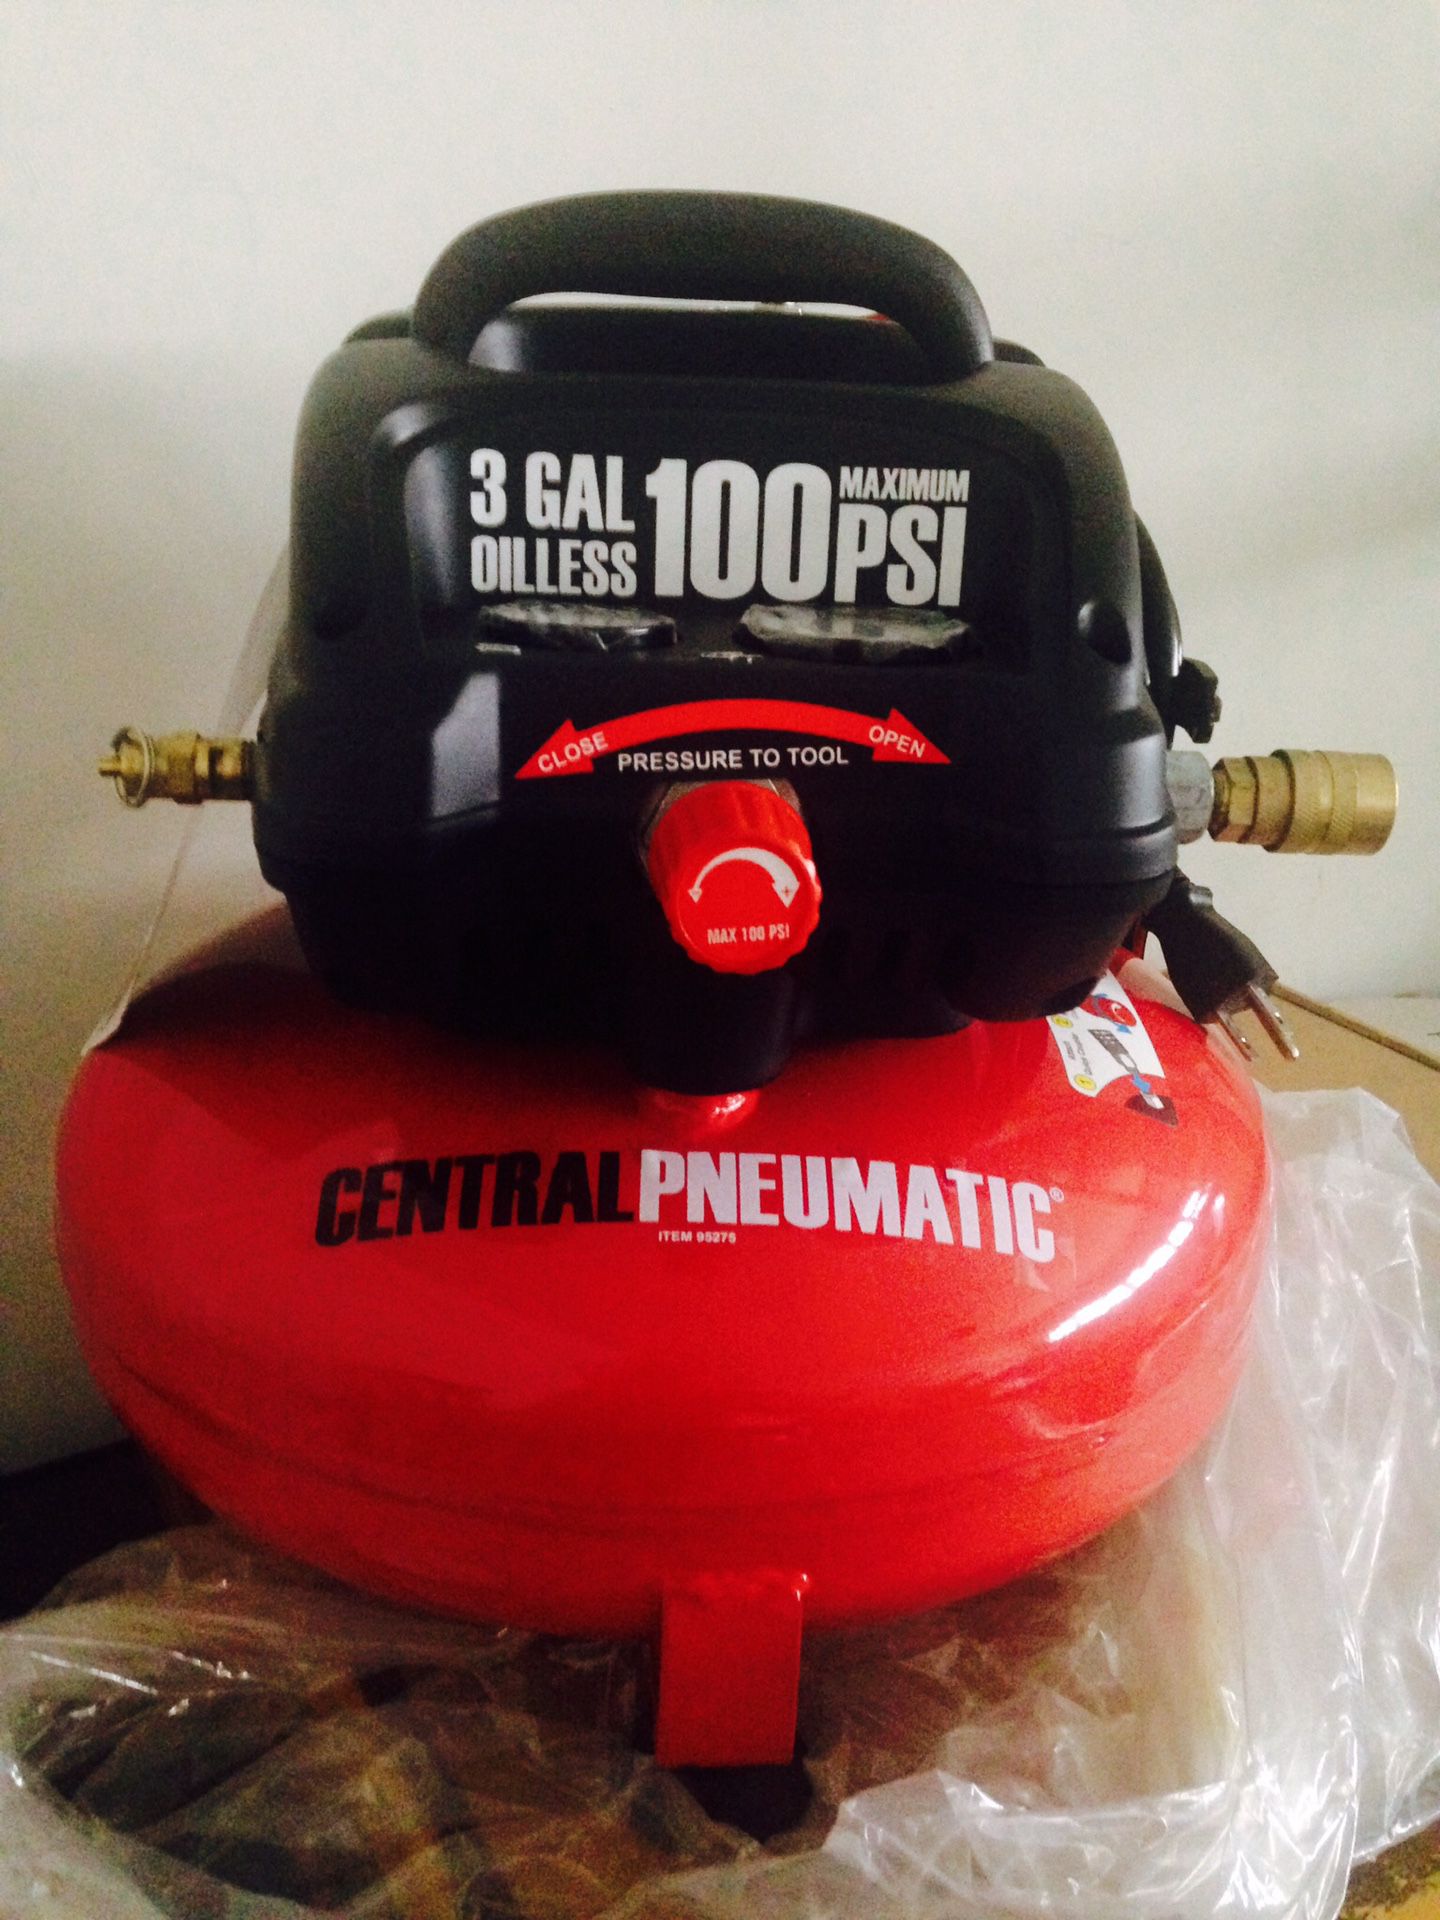 Oilless Pancake Air Compressor 3Gallon/ 100 Psi by Central Pneumatic (brand new)obo